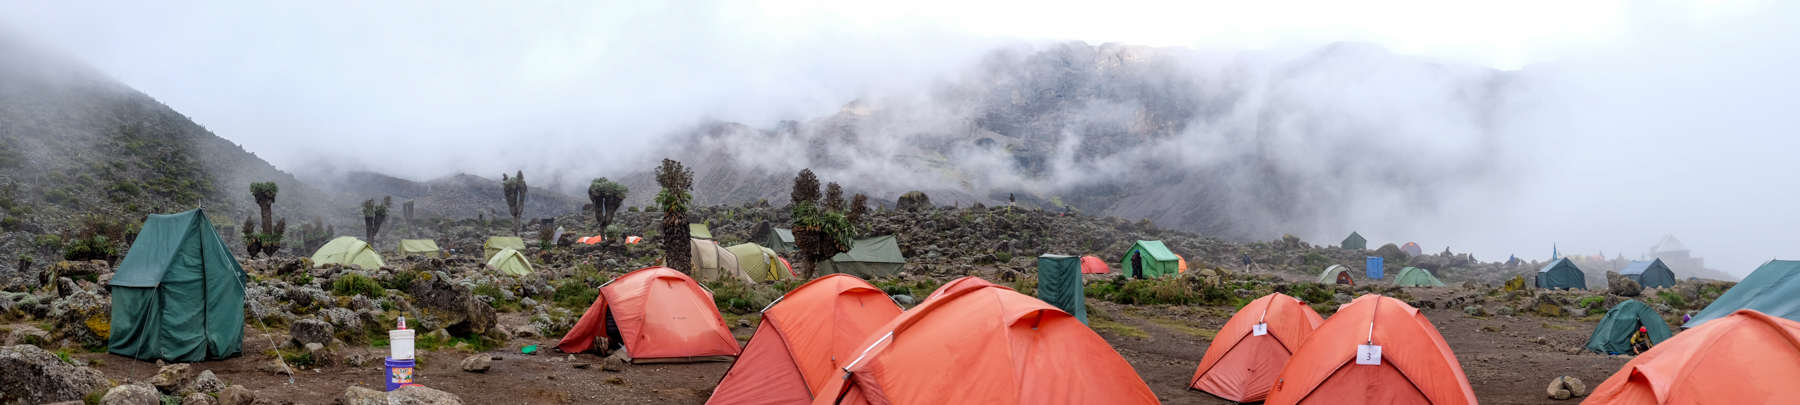 A line of orange tents and a green toilet tent set in the misty, tree valley of Barranco in Kilimanjaro